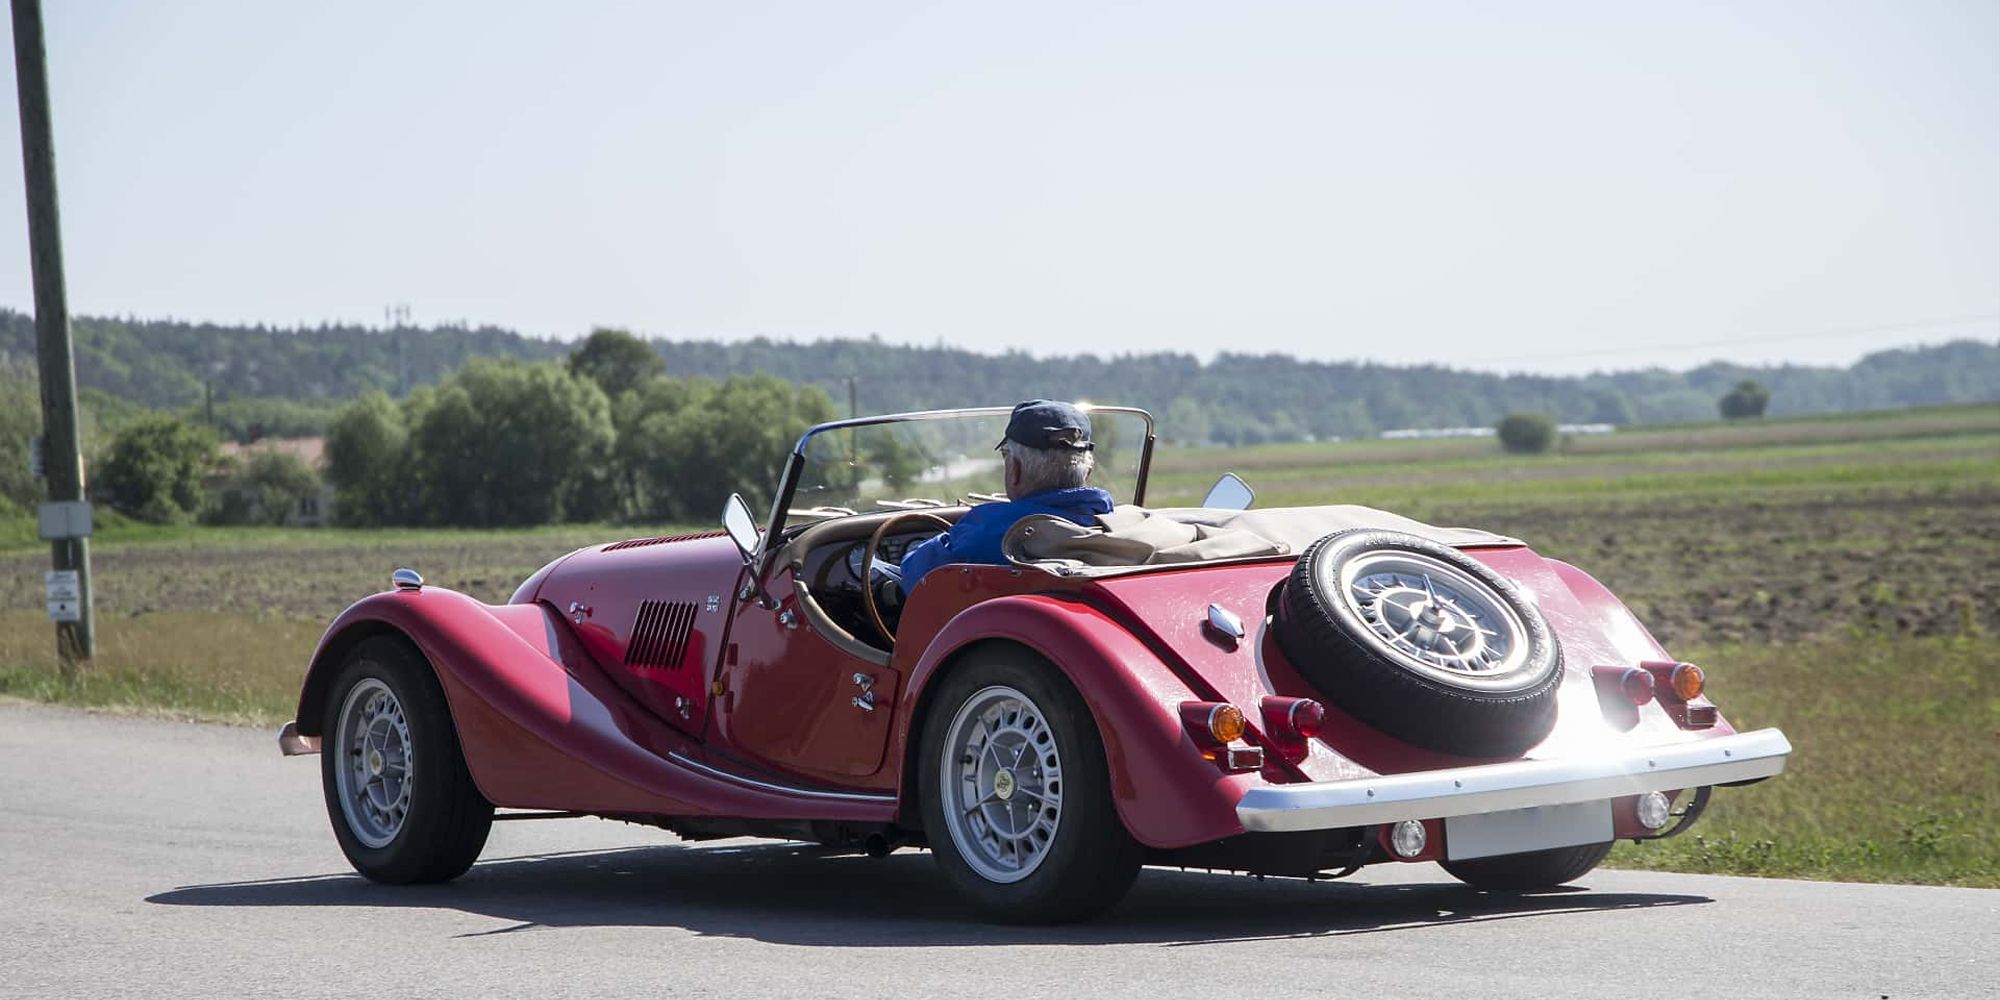 A Morgan Plus 8 in red